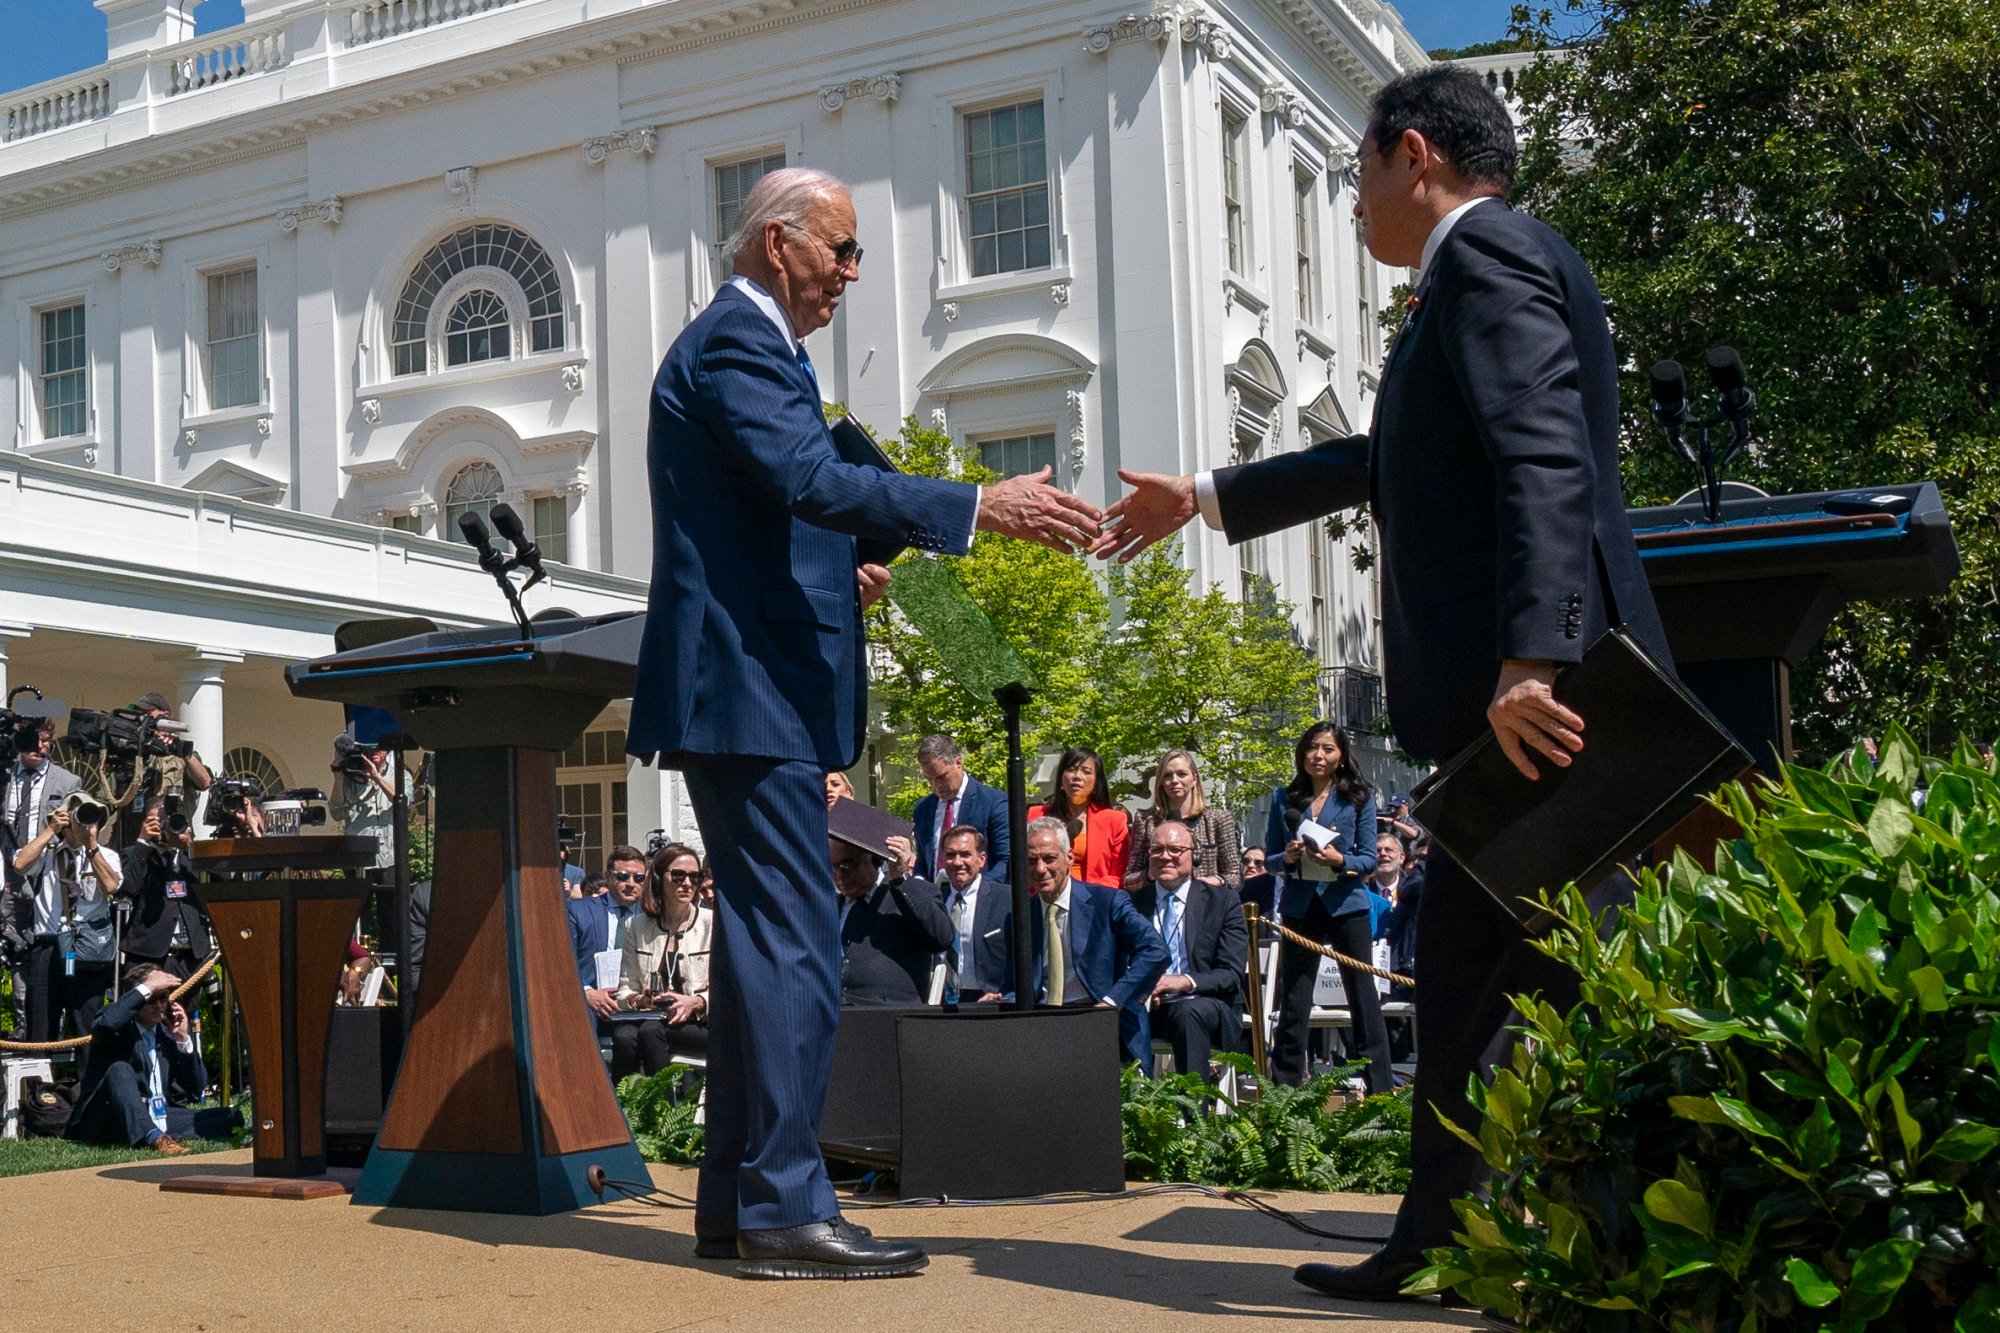 President Joe Biden, left, and Japanese Prime Minister Fumio Kishida shake hands after a news conference in the Rose Garden of the White House on Wednesday. Photo: AP